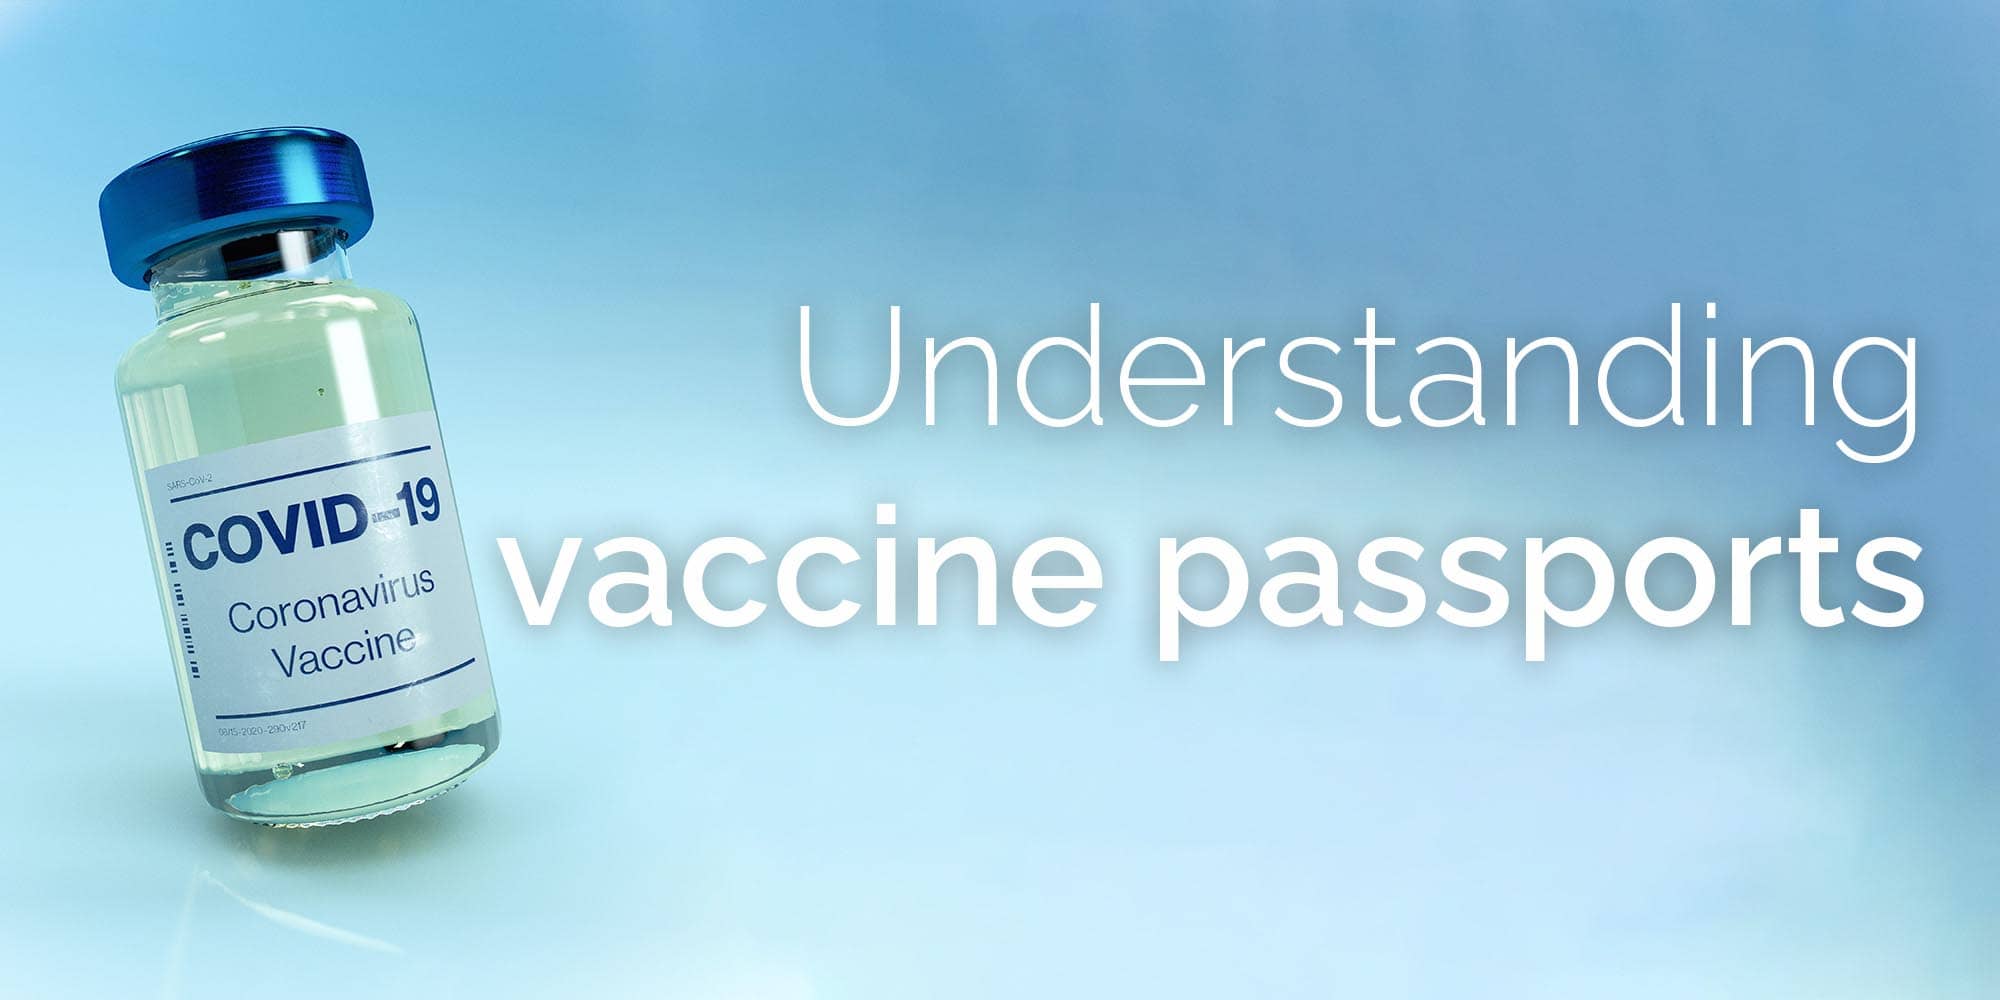 The tour operator’s guide to covid vaccination passports